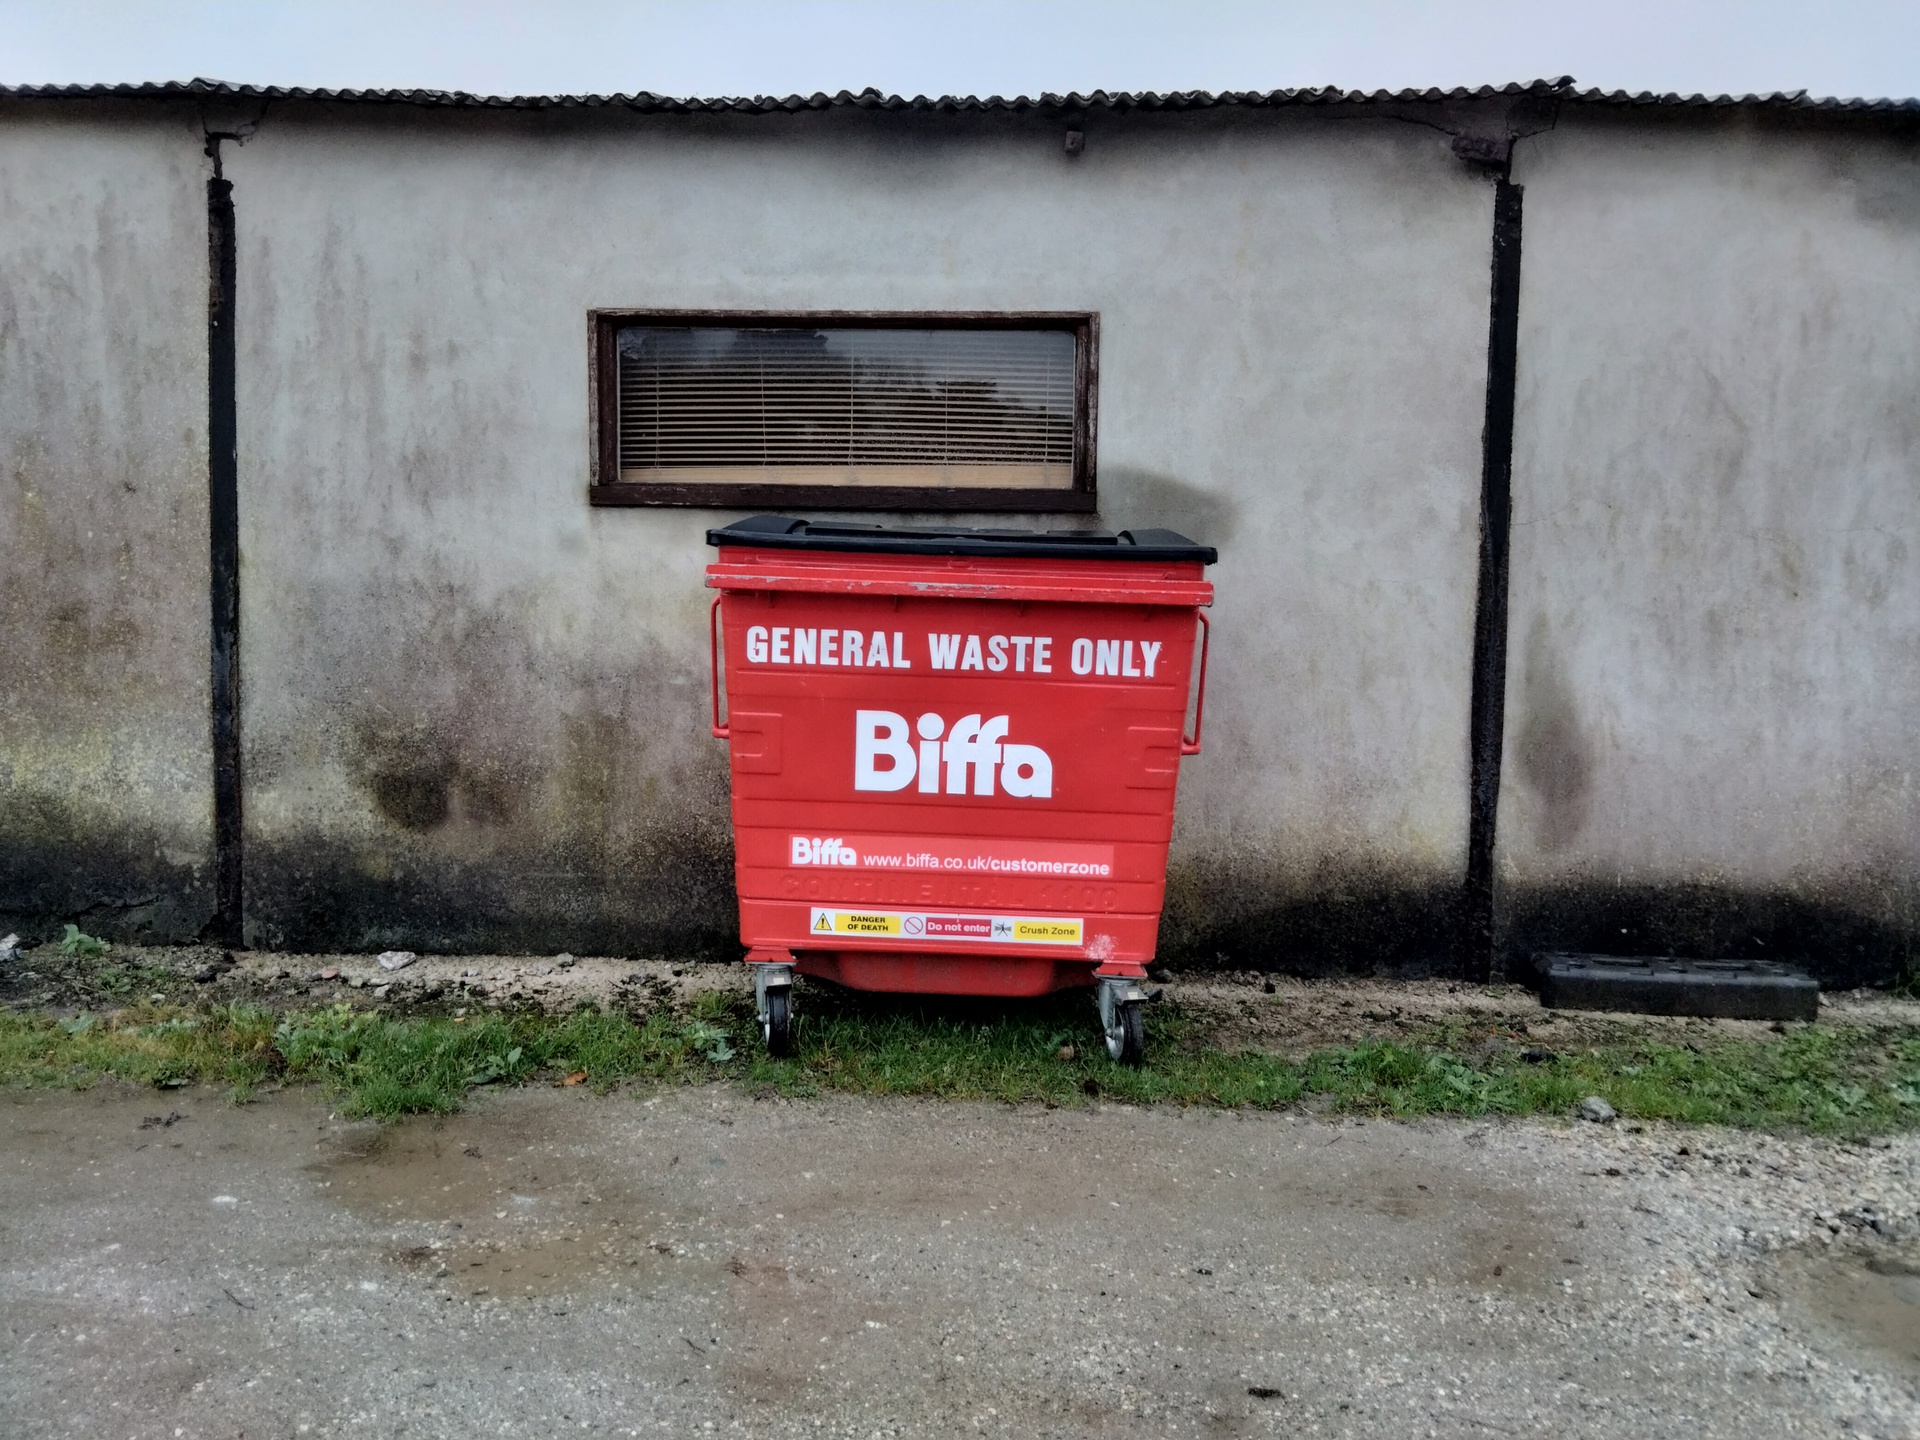 OnePlus Nord N100 photo sample of a red bin